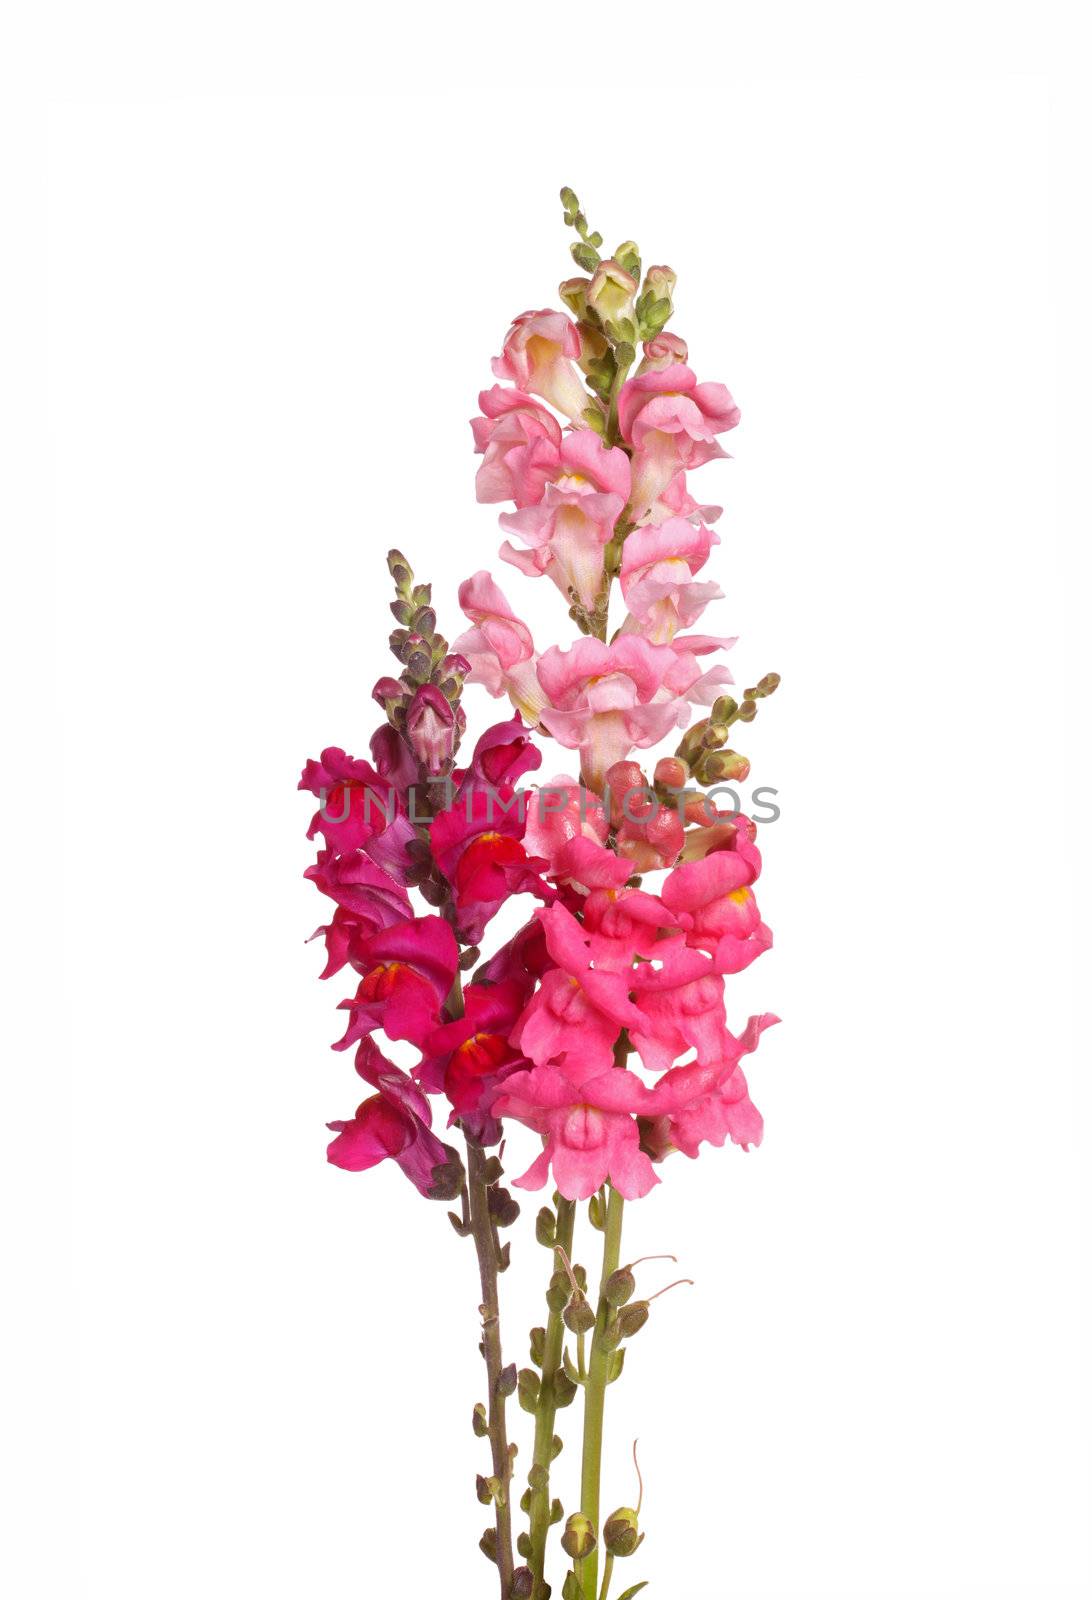 Stems of pink, red and purple shapdragon flowers isolated on whi by sgoodwin4813